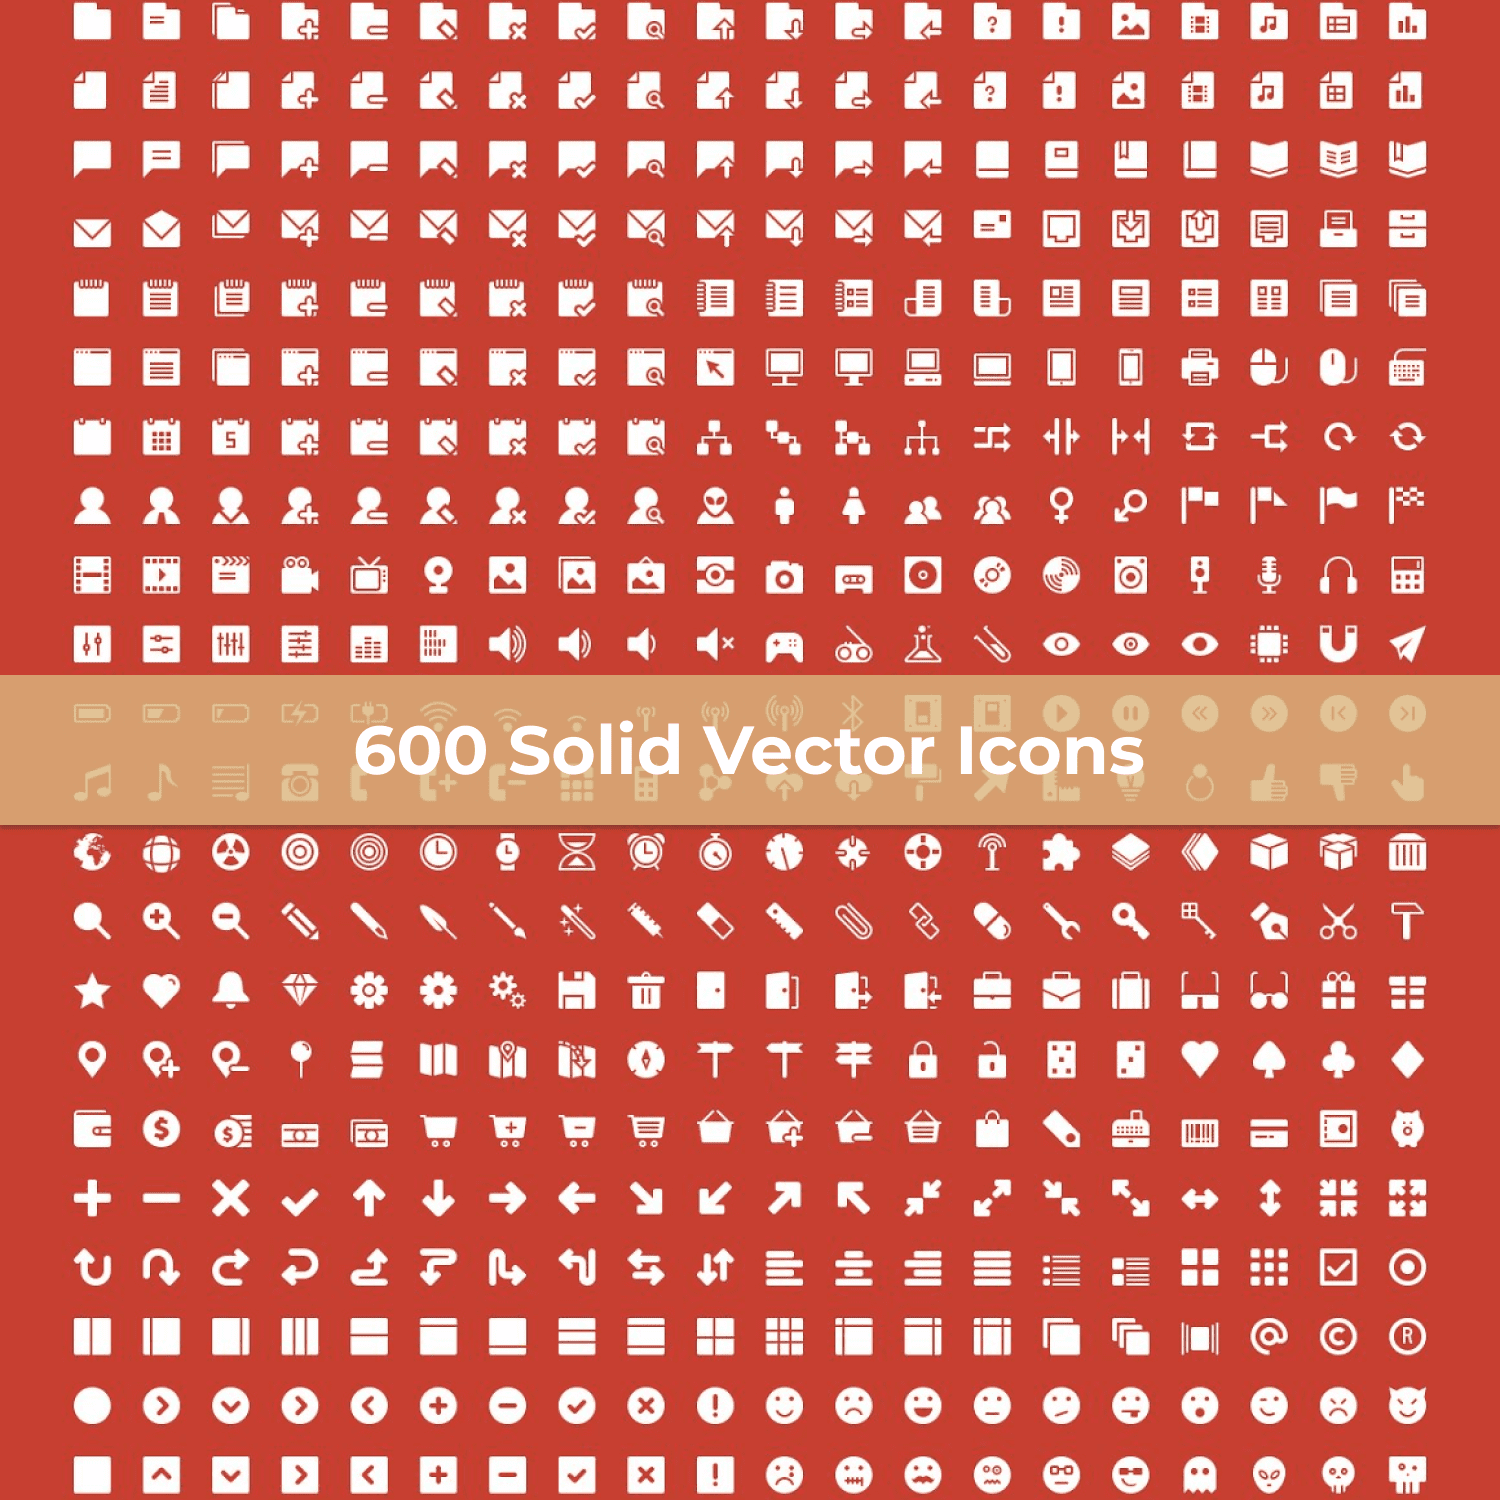 600 Solid Vector Icons cover image.